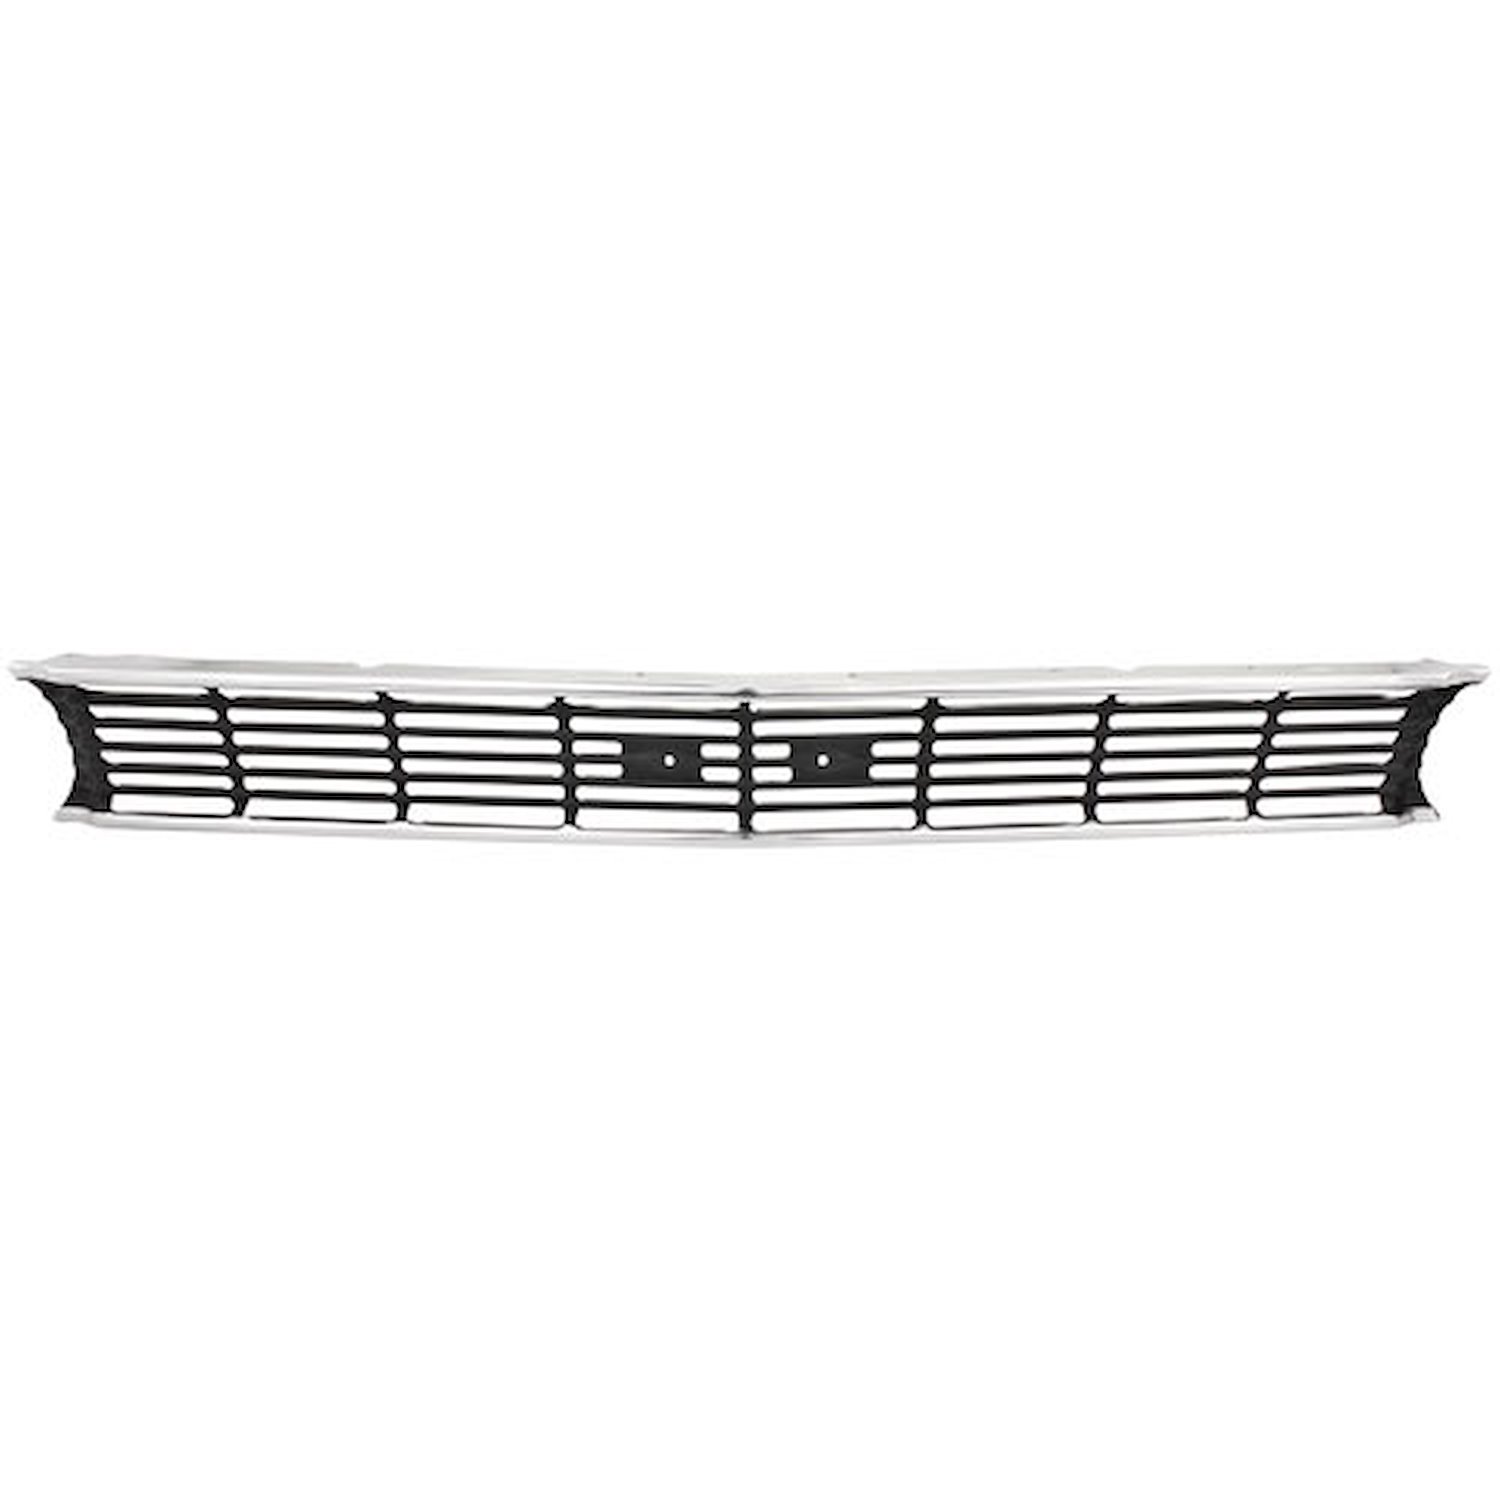 Grille for 1966 Chevy Chevelle, El Camino SS